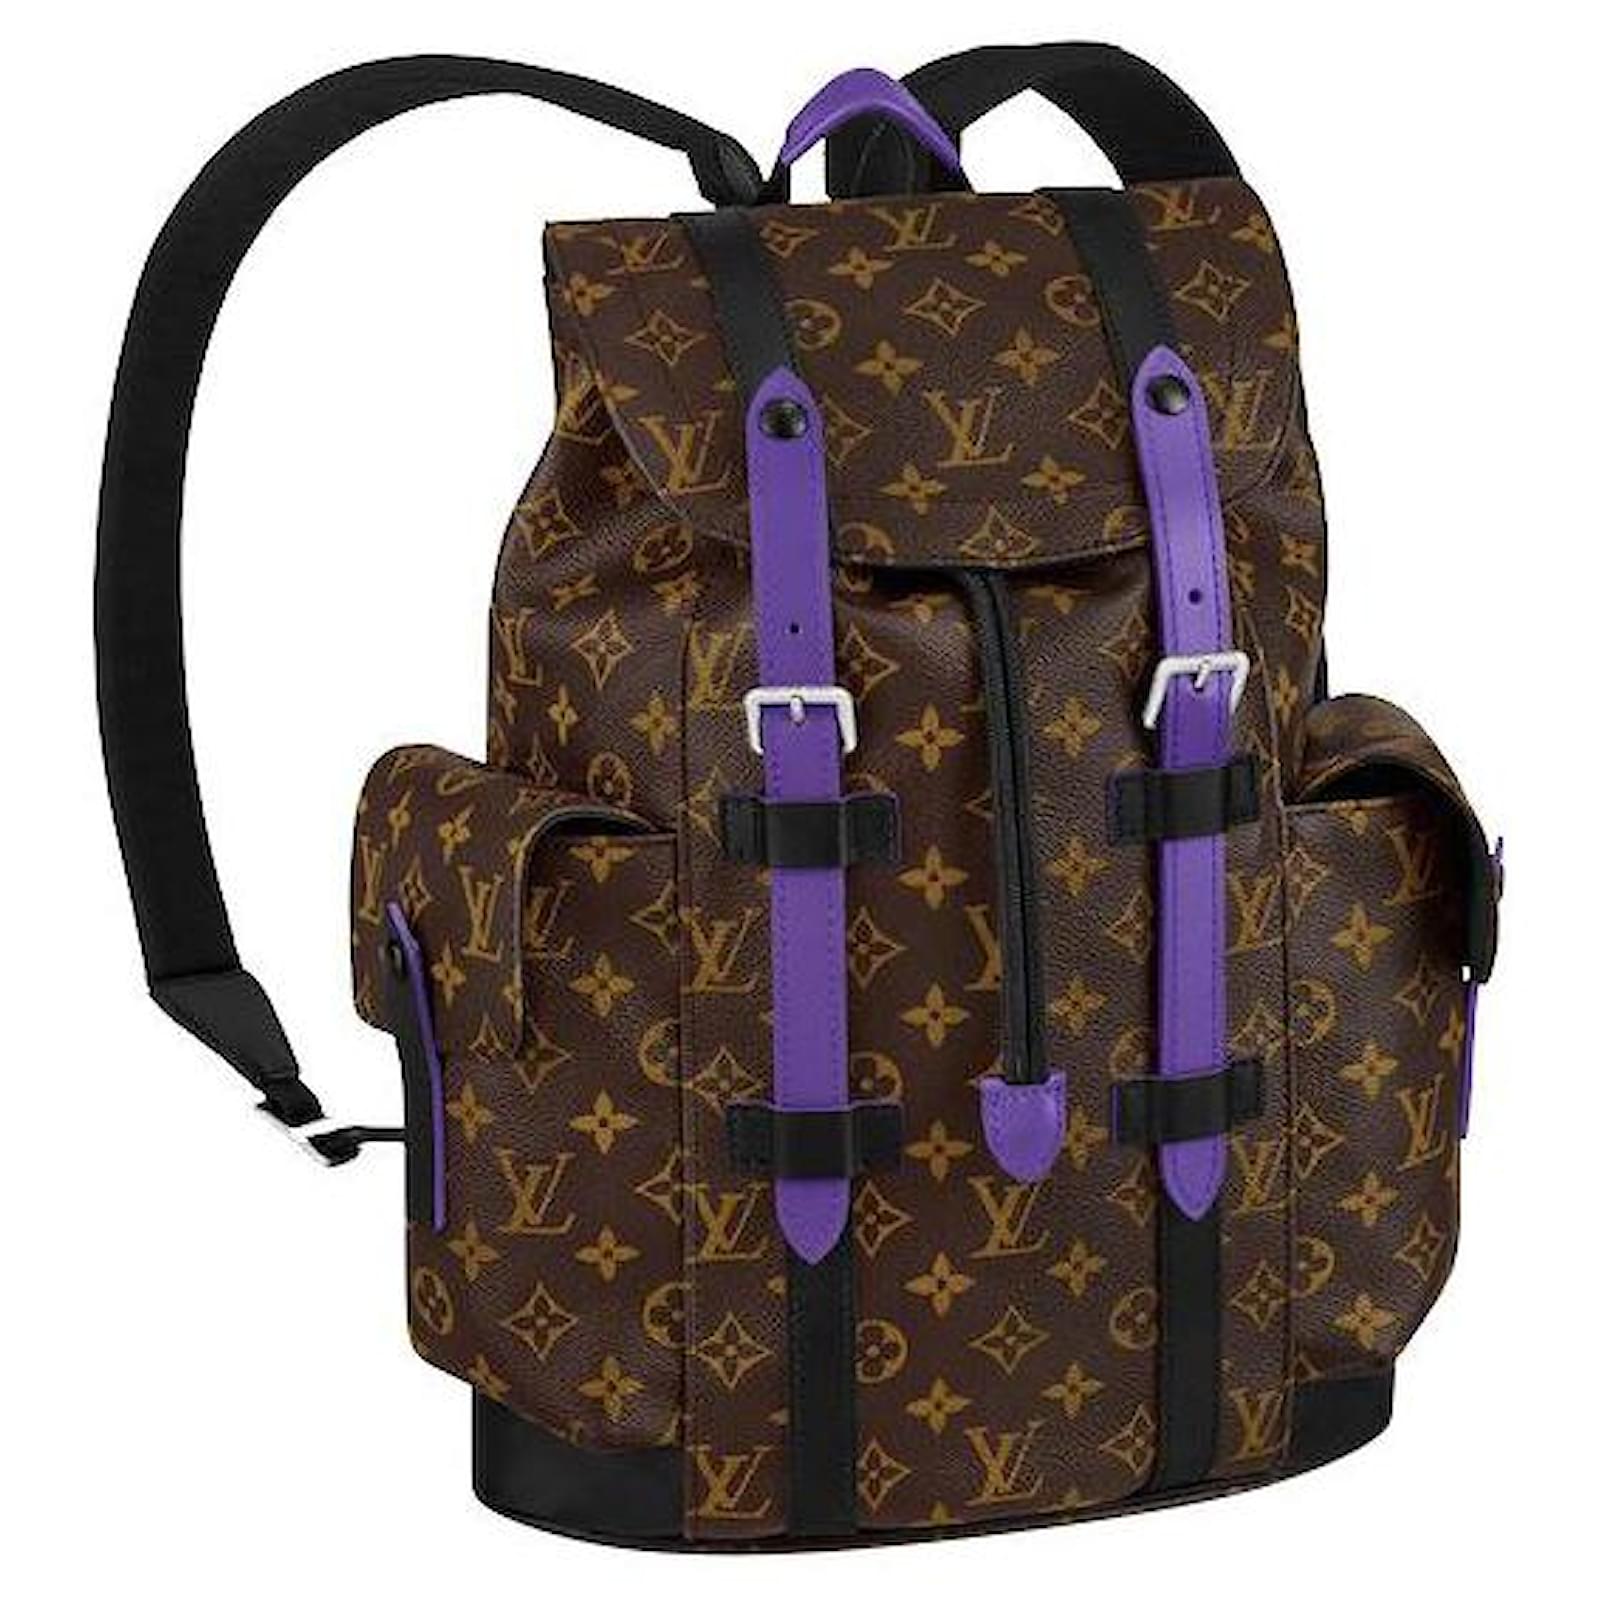 Louis Vuitton Christopher Backpack 364197